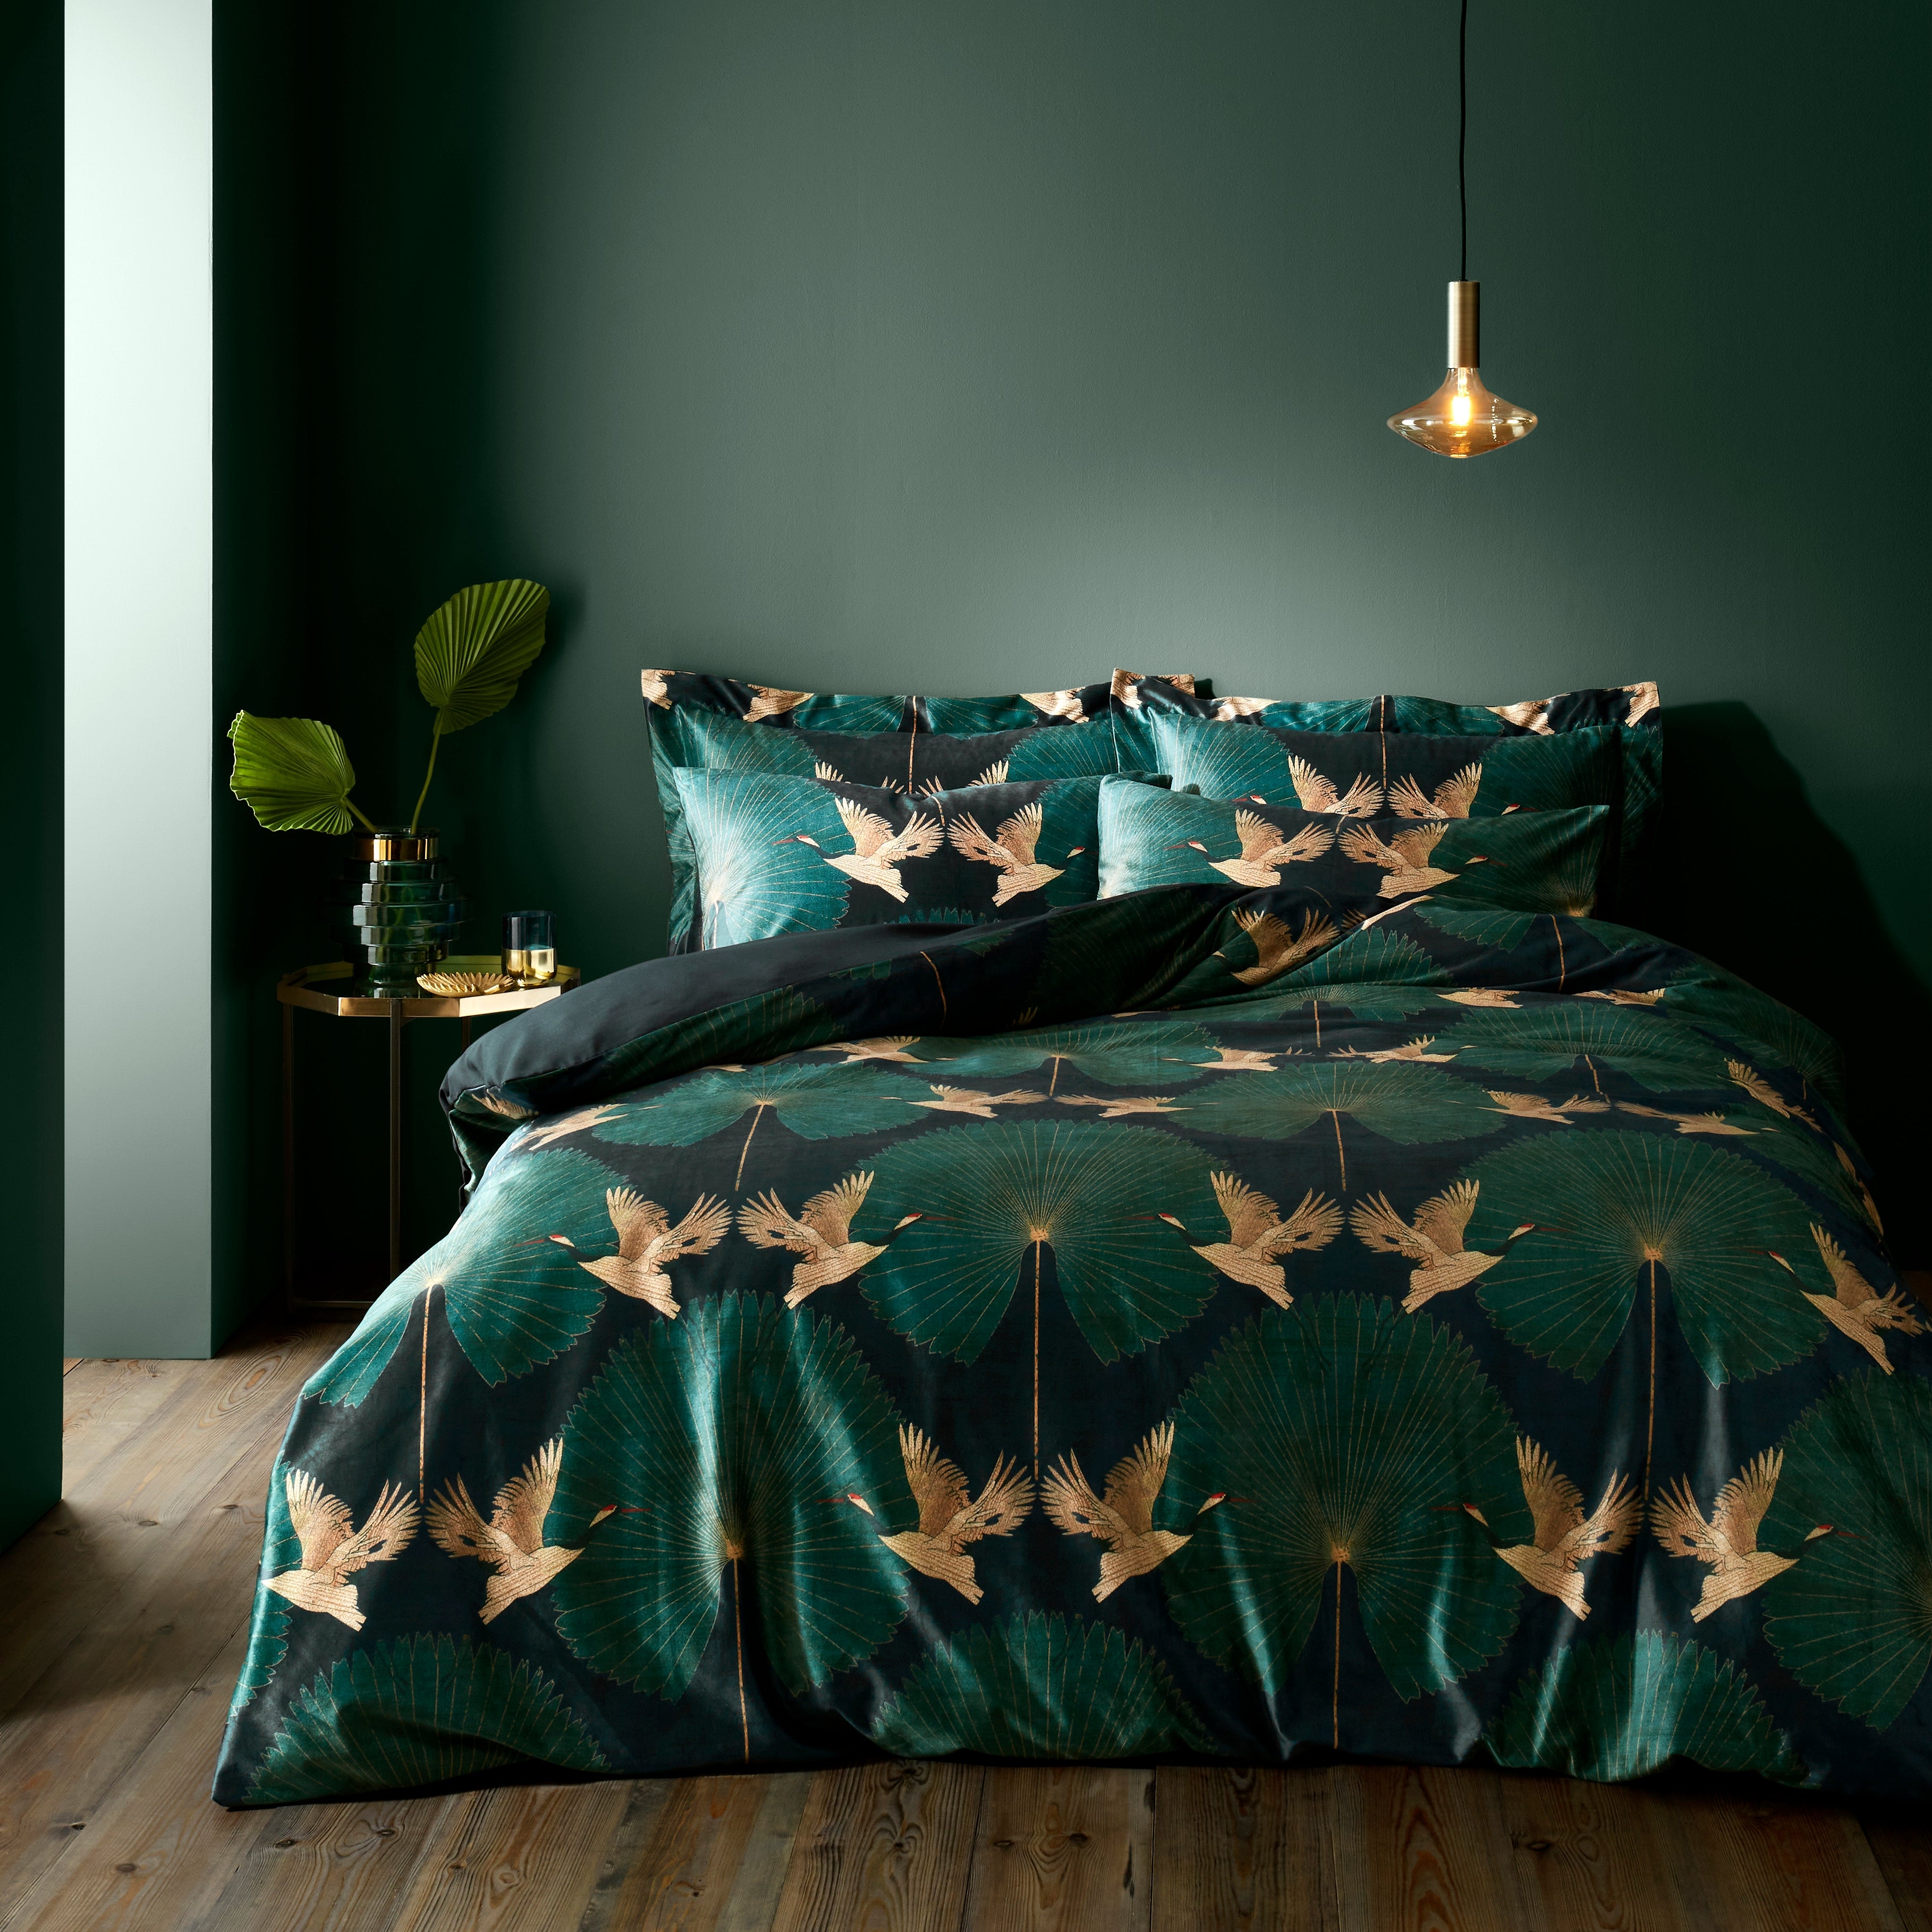 Luxe Cranes Emerald Duvet Cover And Pillowcase Set Greengold